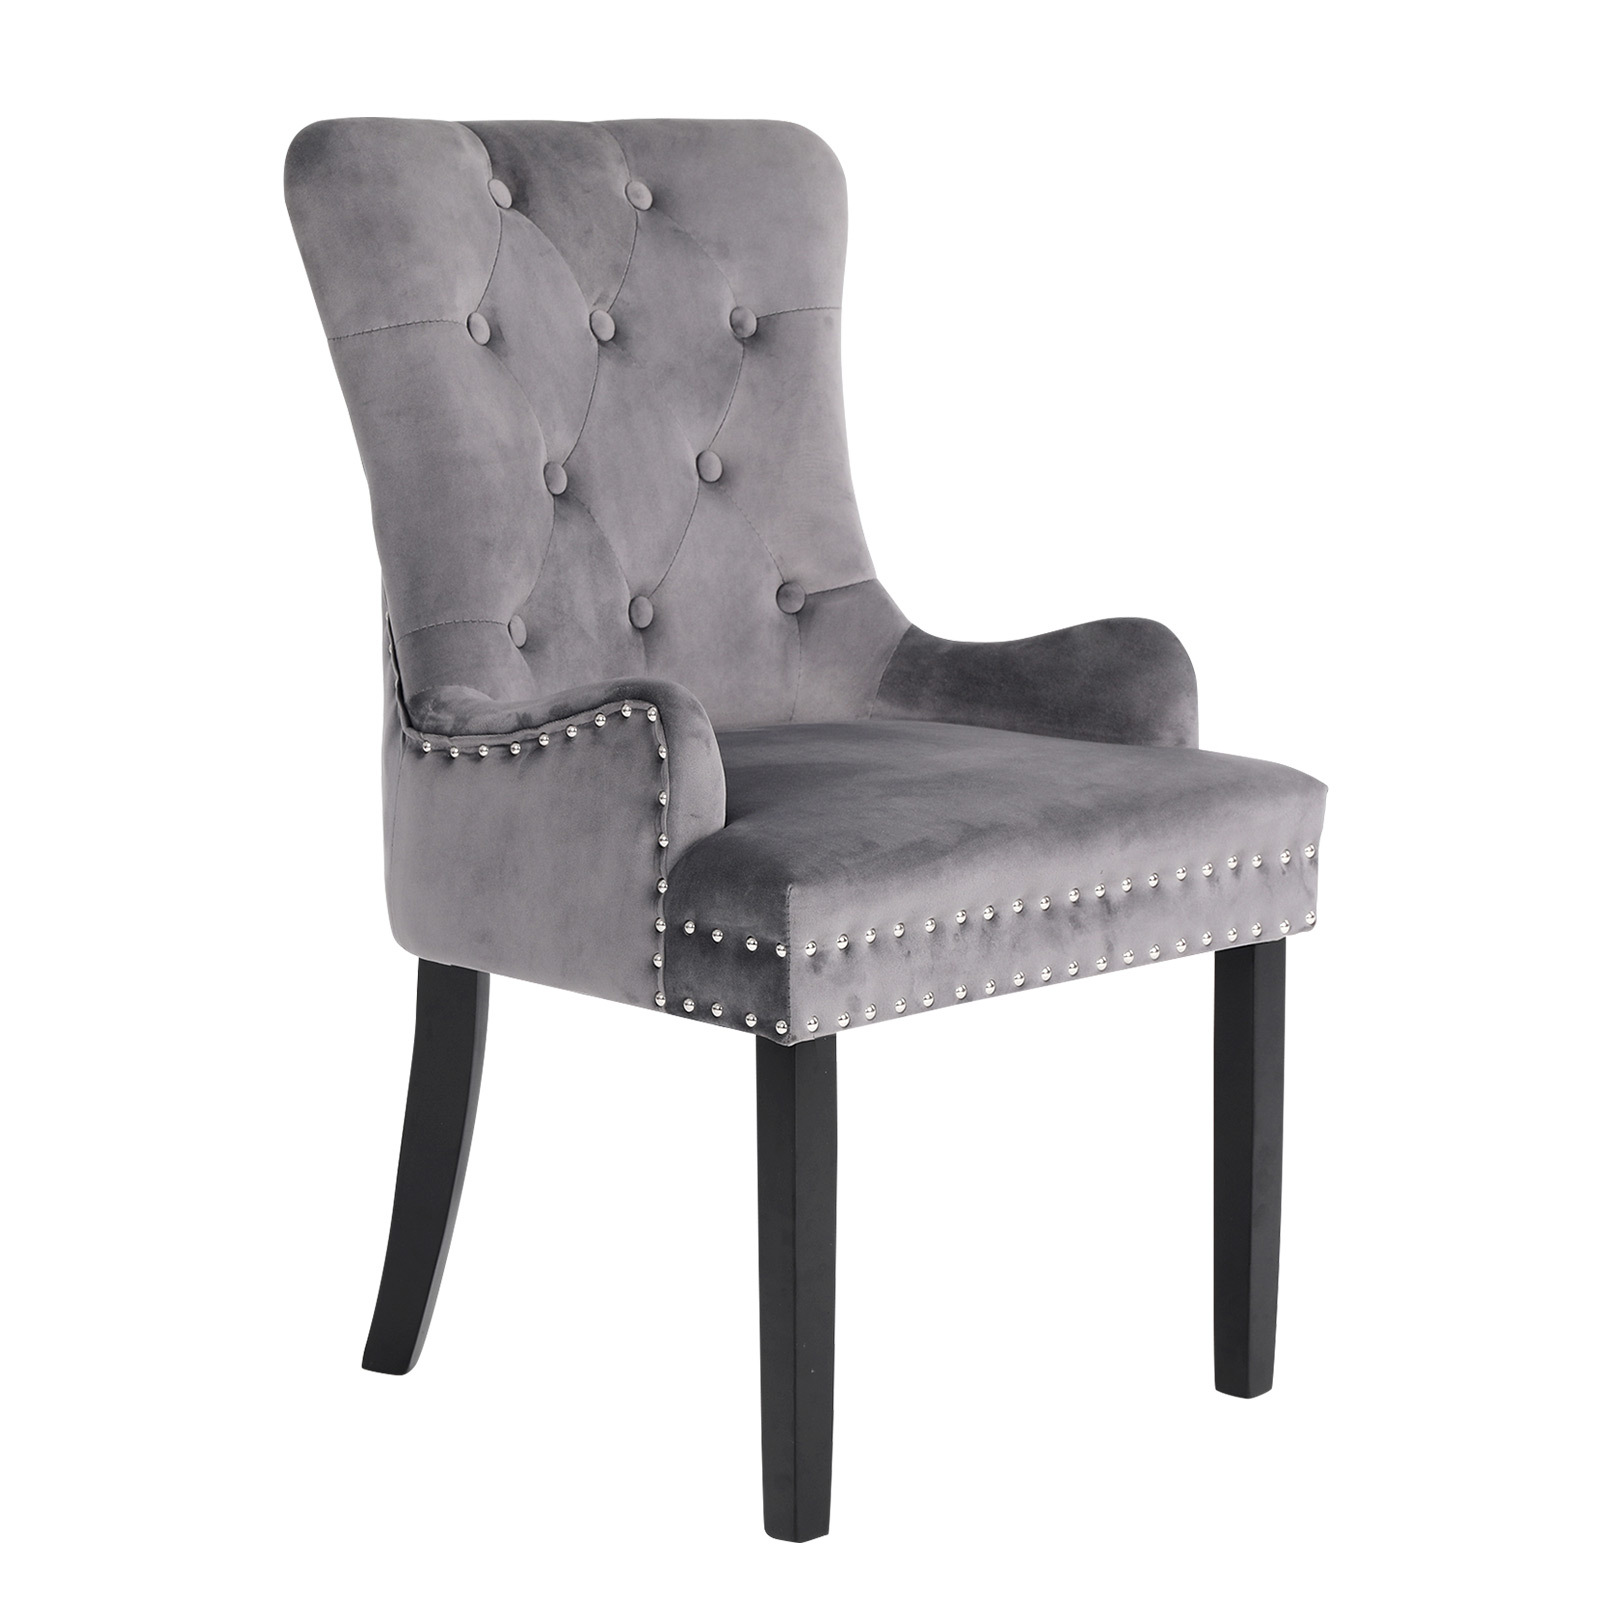 1X French Provincial Velvet with Ring Chair LISSE - GREY